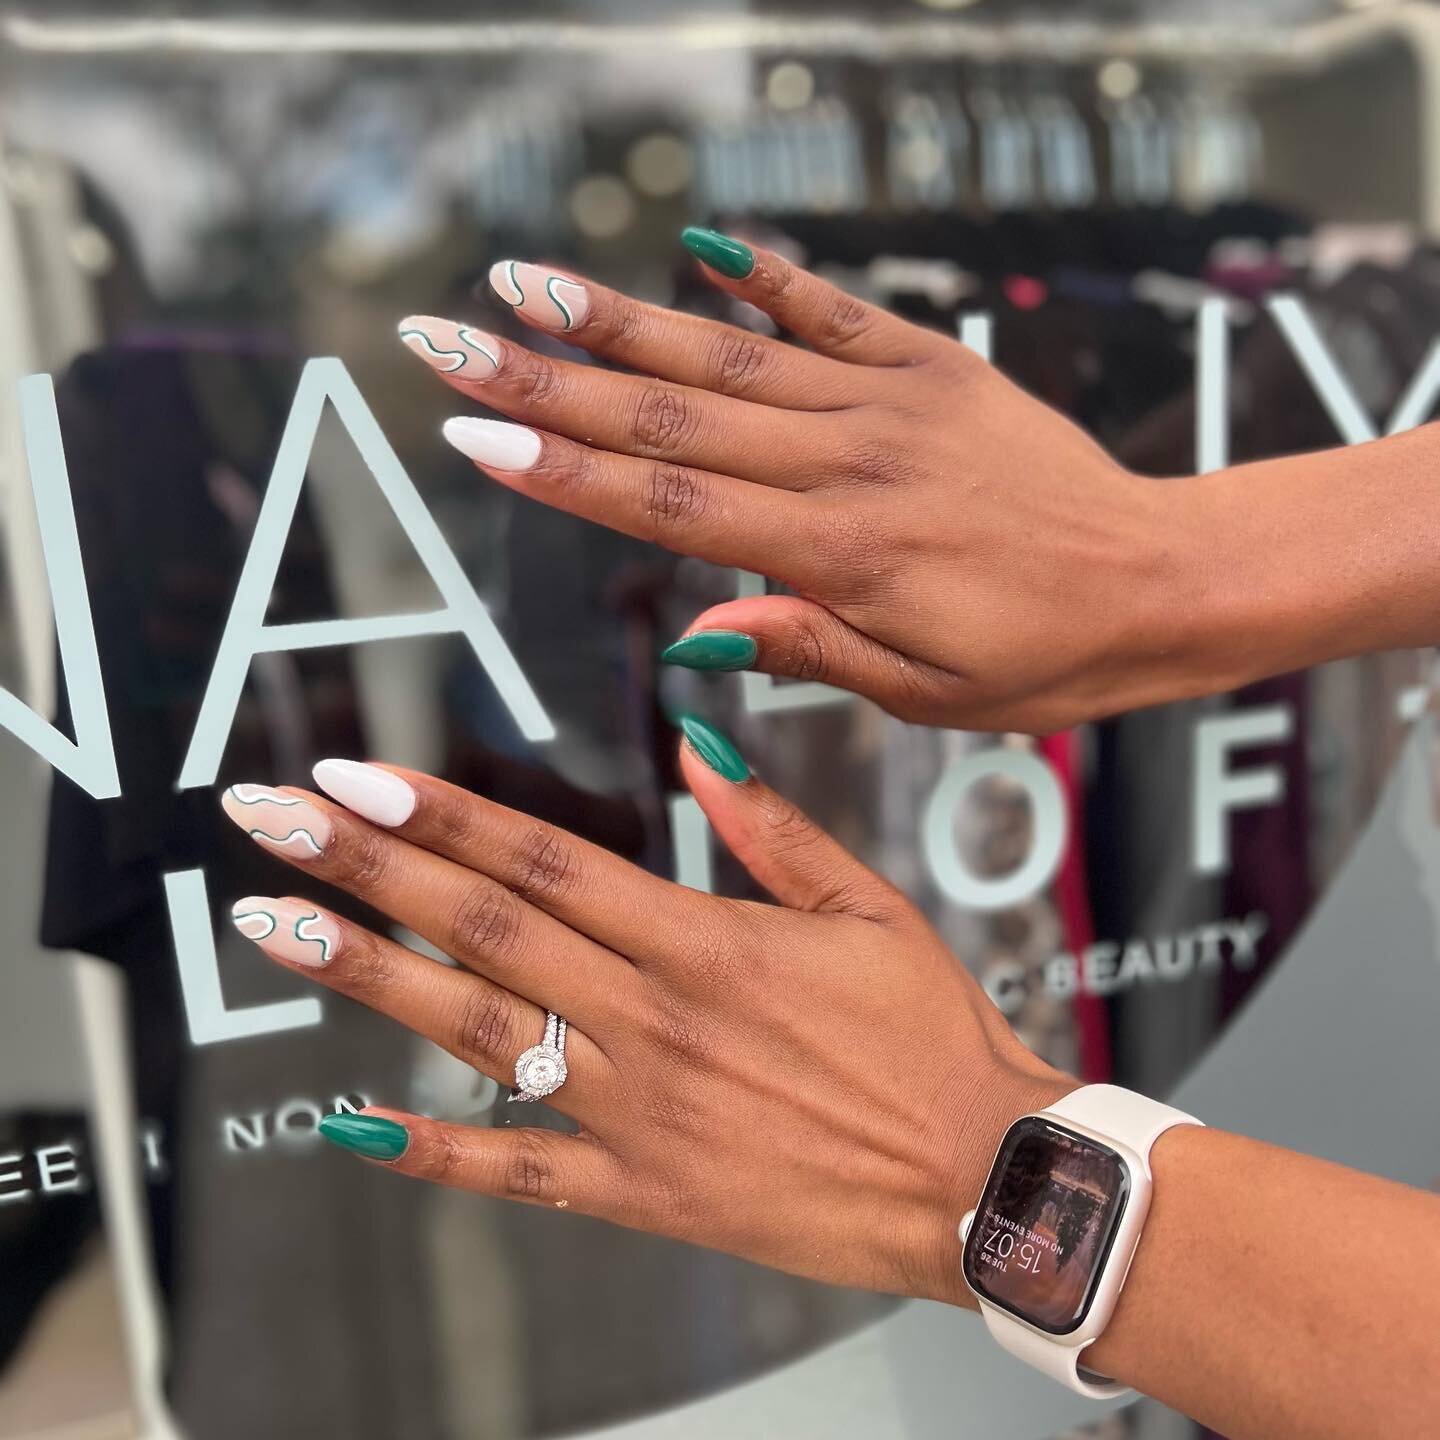 Gel-X nail tips and Extend gel are manufactured from cutting edge soft gel formulas for convenient soak-off capabilities. No filing needed, no dust, no odor, and no damage to natural nails! Try Gel-X as an alternative option to traditional acrylic or